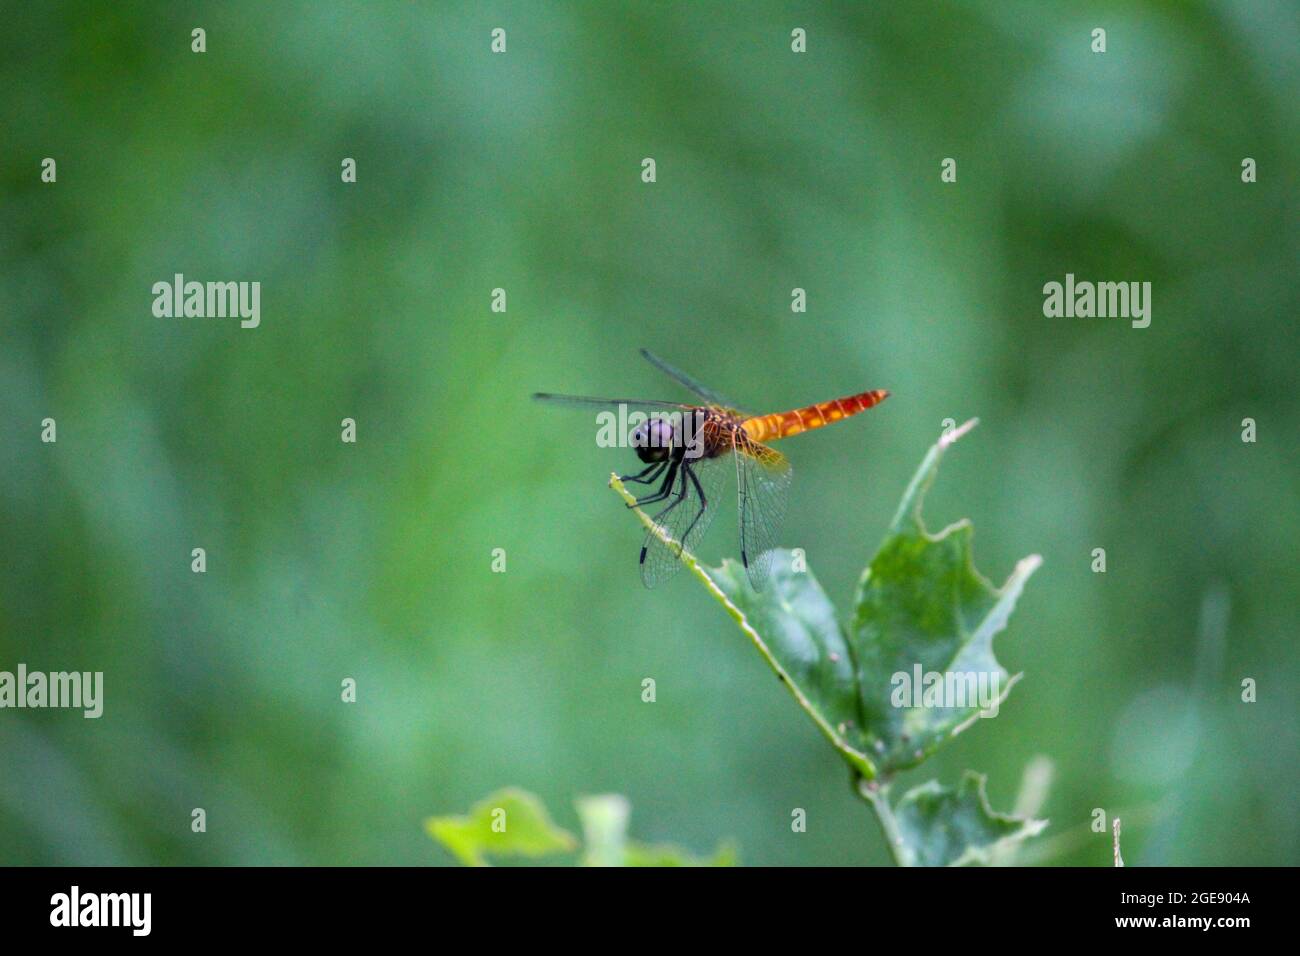 Selective focus of a red dragonfly on a green plant leaf on the blurred garden background Stock Photo